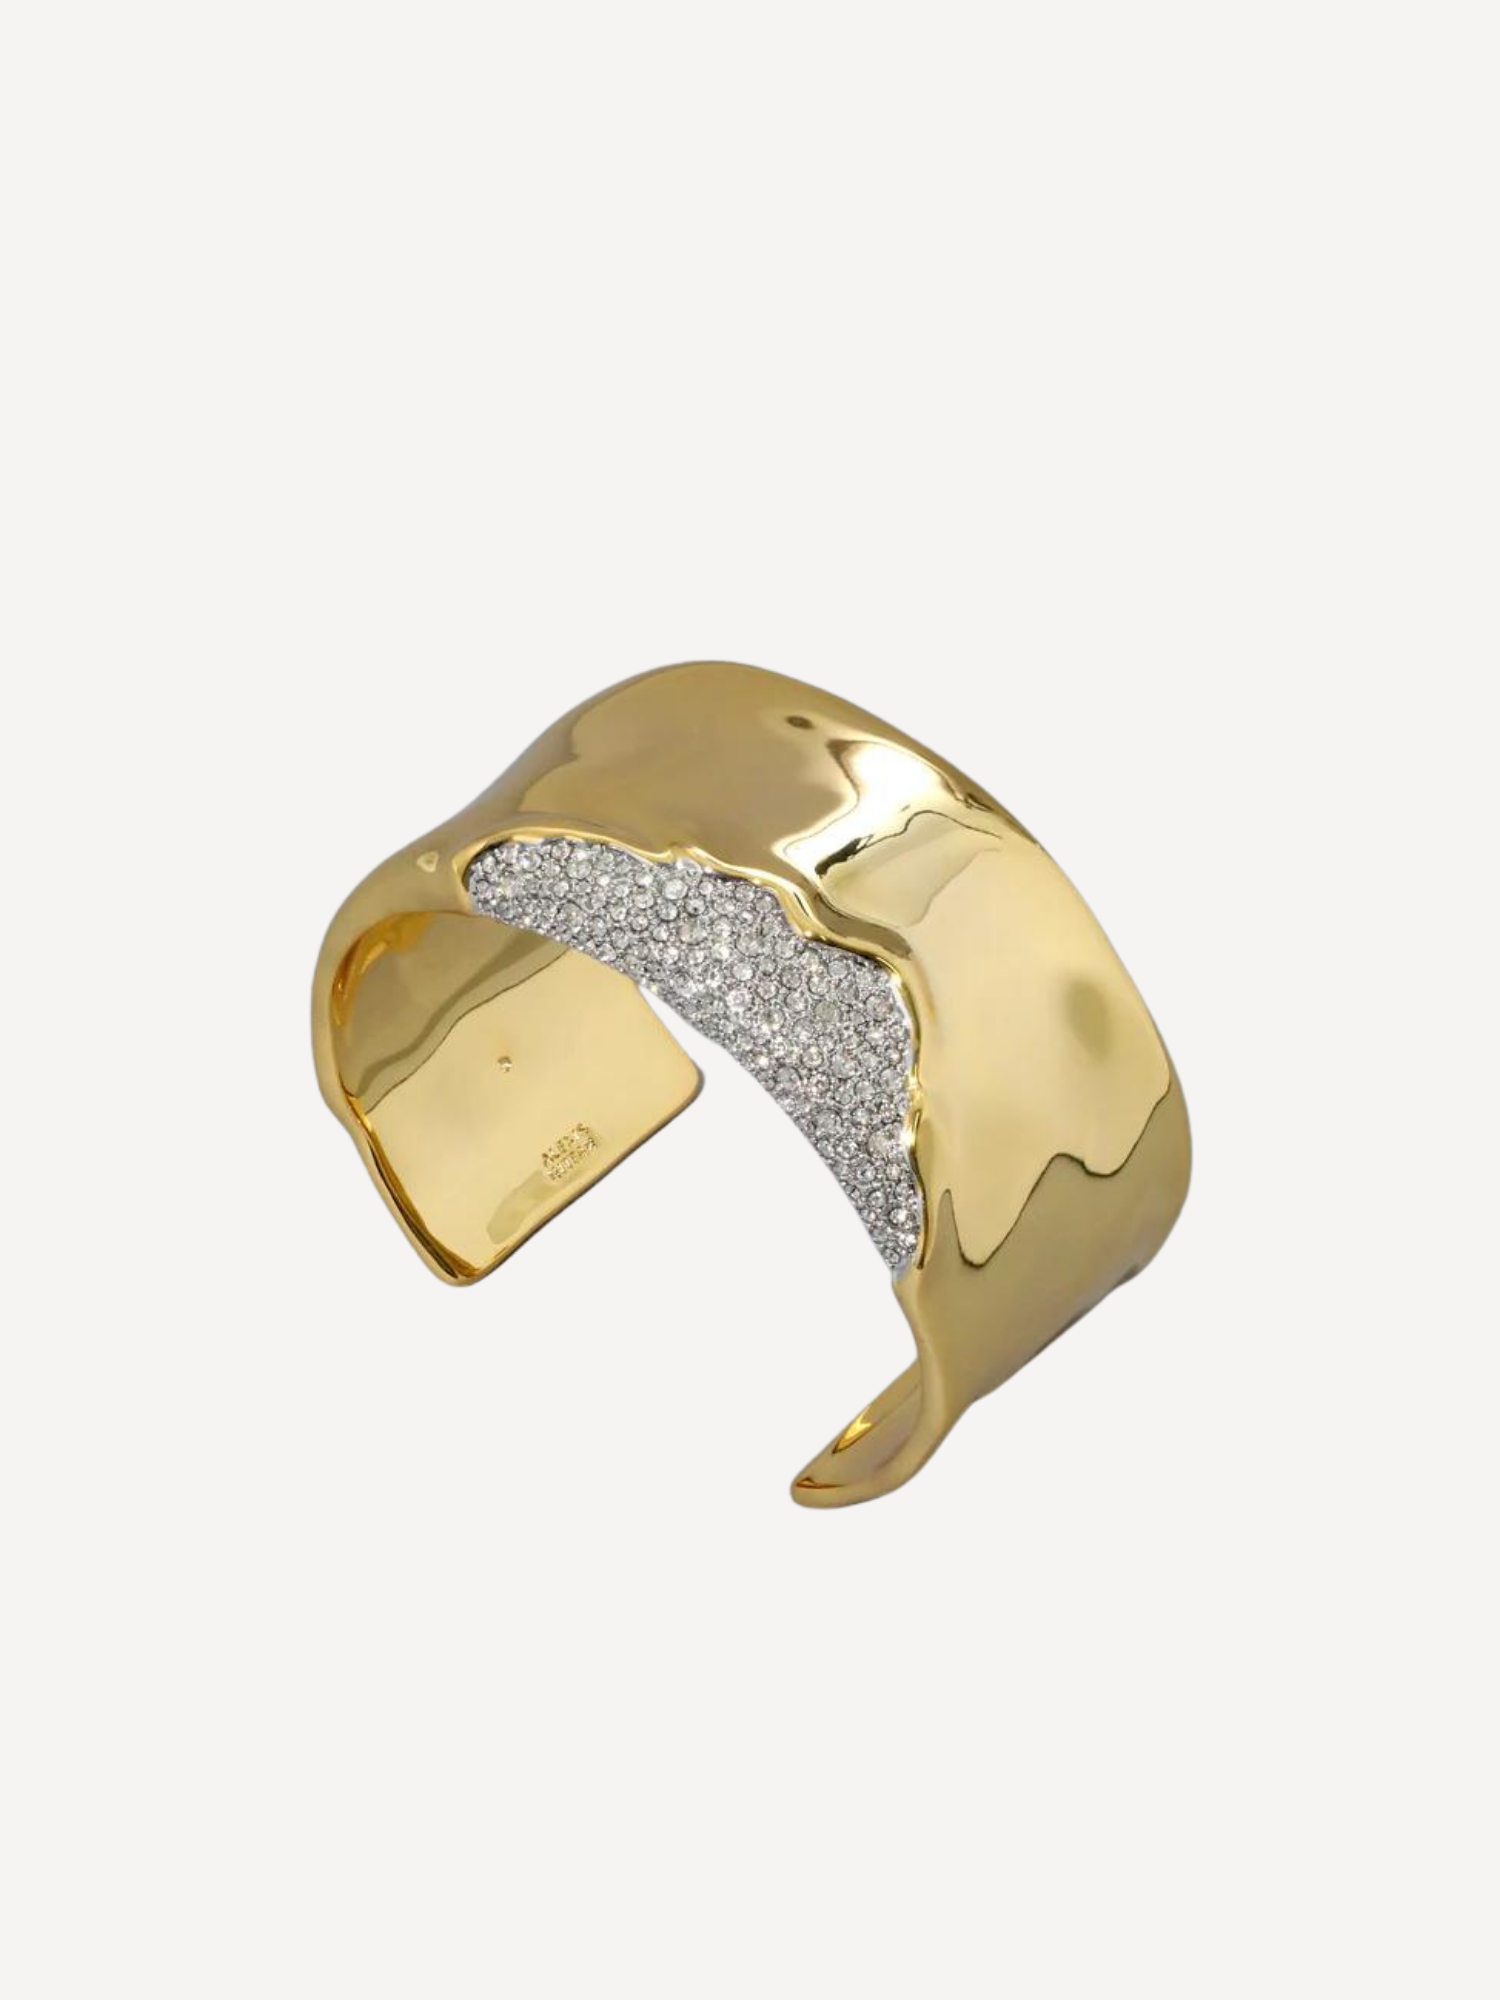 Solanales Gold Crystal Wide Cuff Bracelet